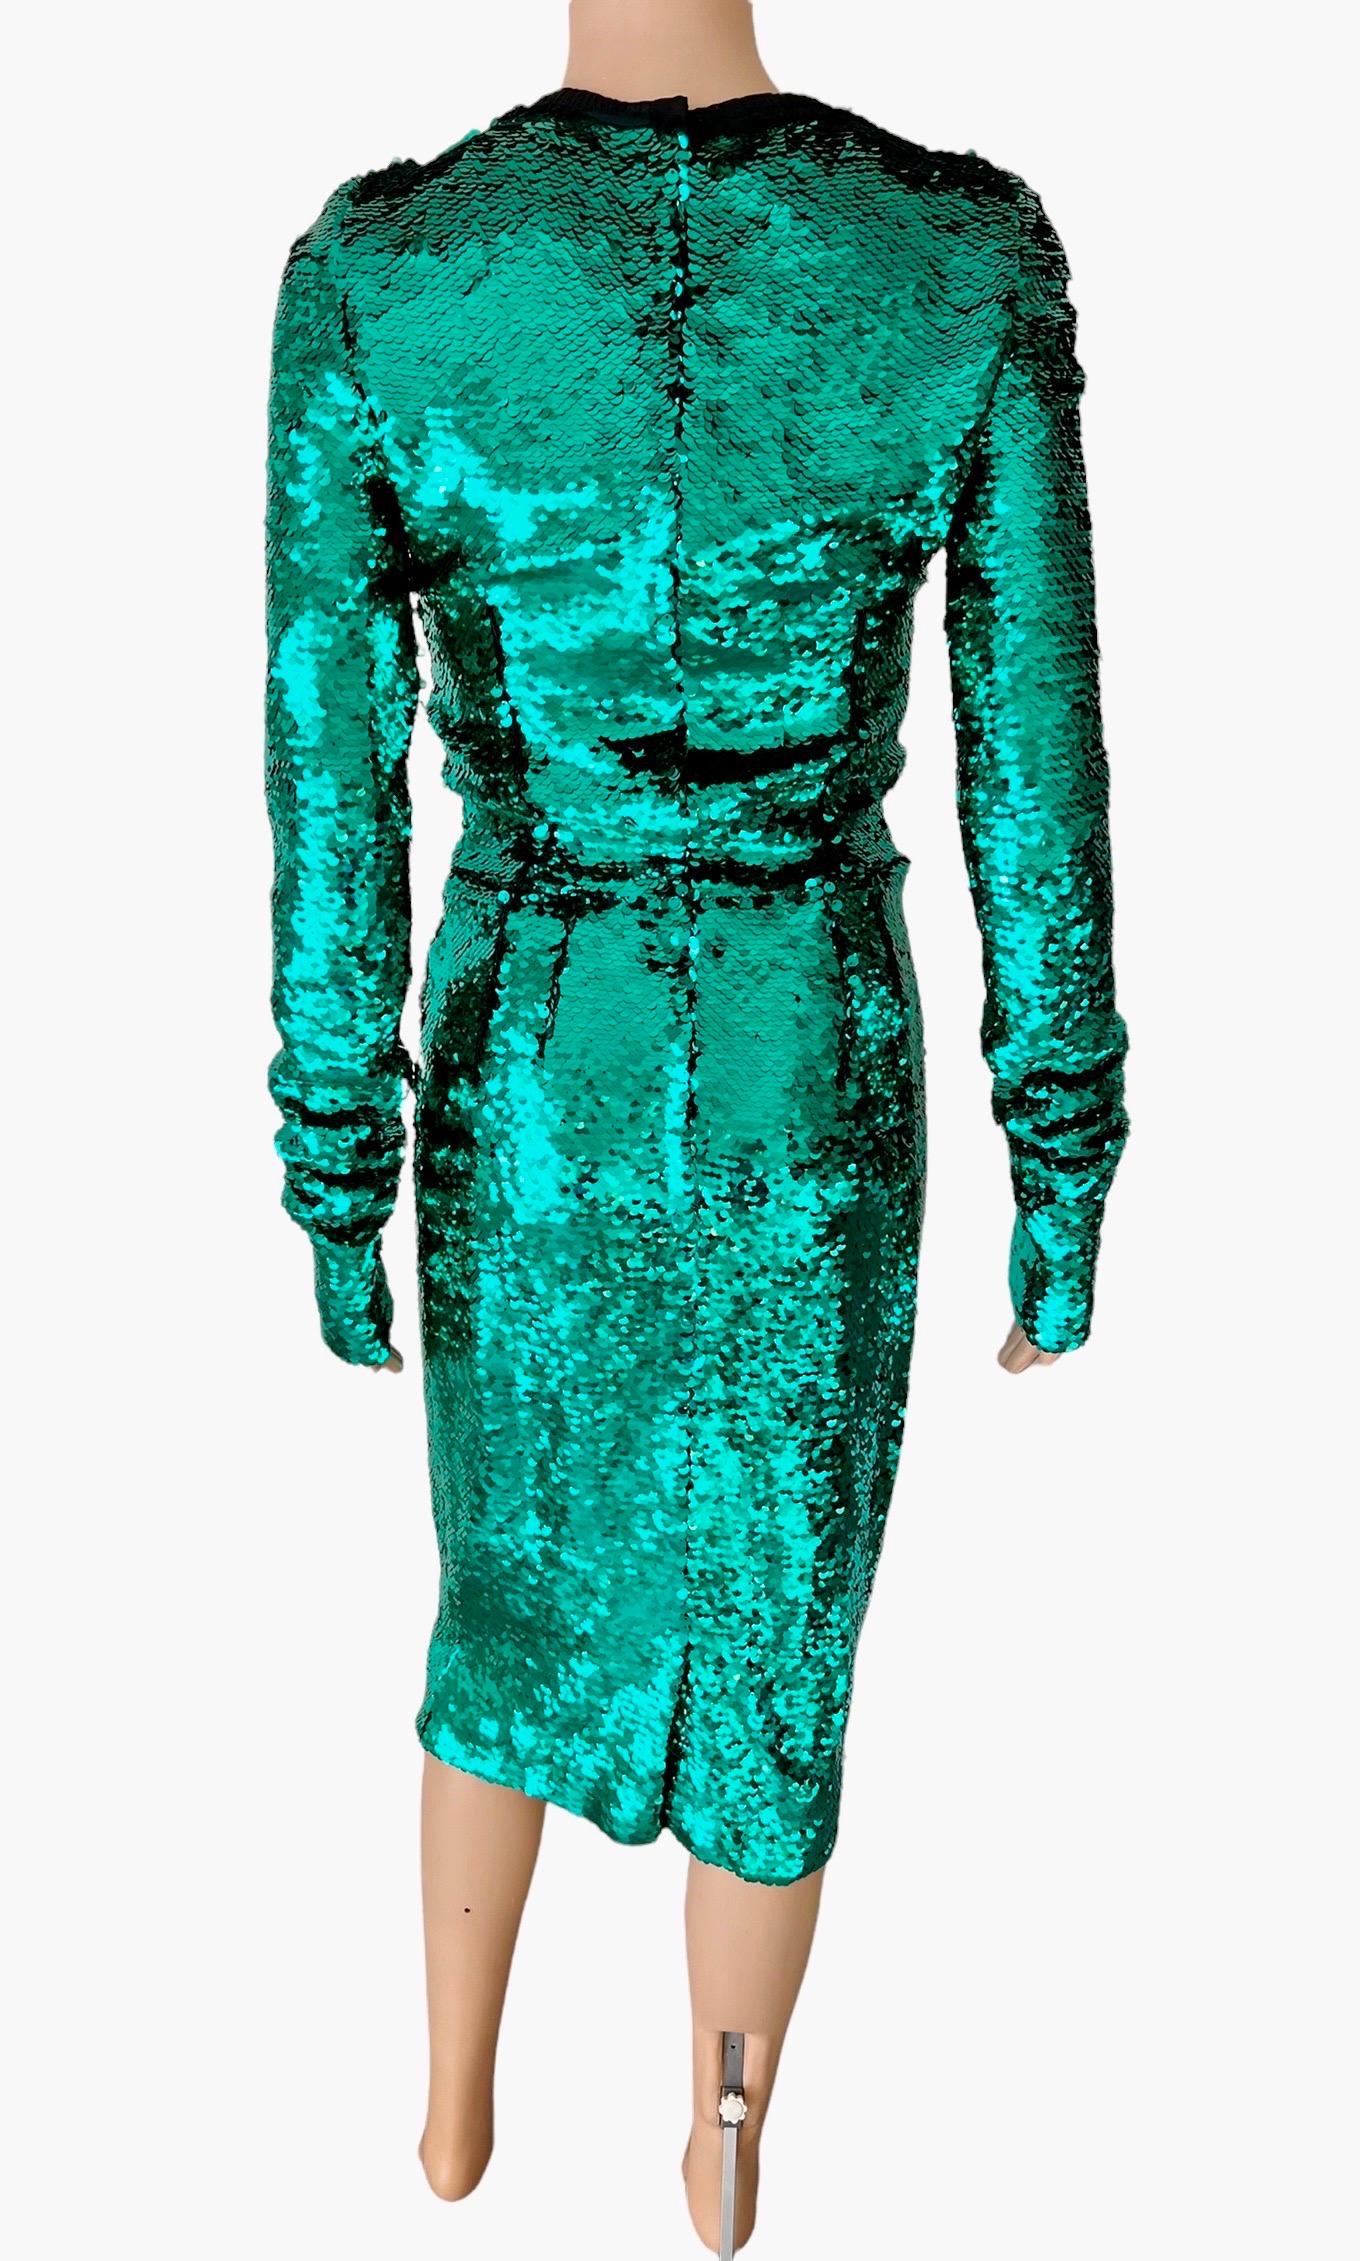 Dolce & Gabbana F/W 2011 Runway Unworn Sequin Embellished Green Evening Dress In New Condition For Sale In Naples, FL